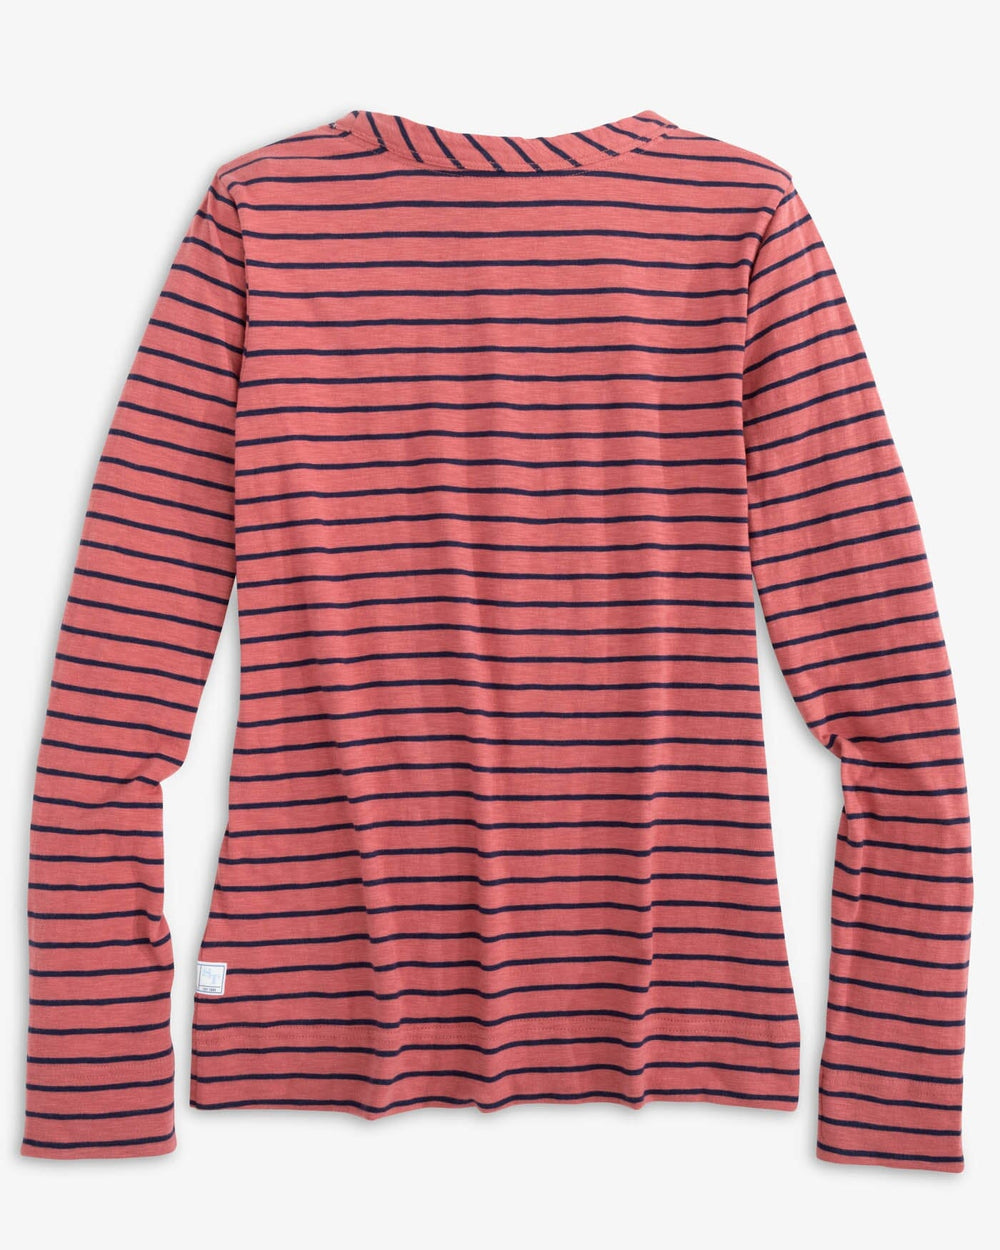 The back view of the Southern Tide Kimmy Stripe Crew Neck Long Sleeve T-Shirt by Southern Tide - Dusty Coral